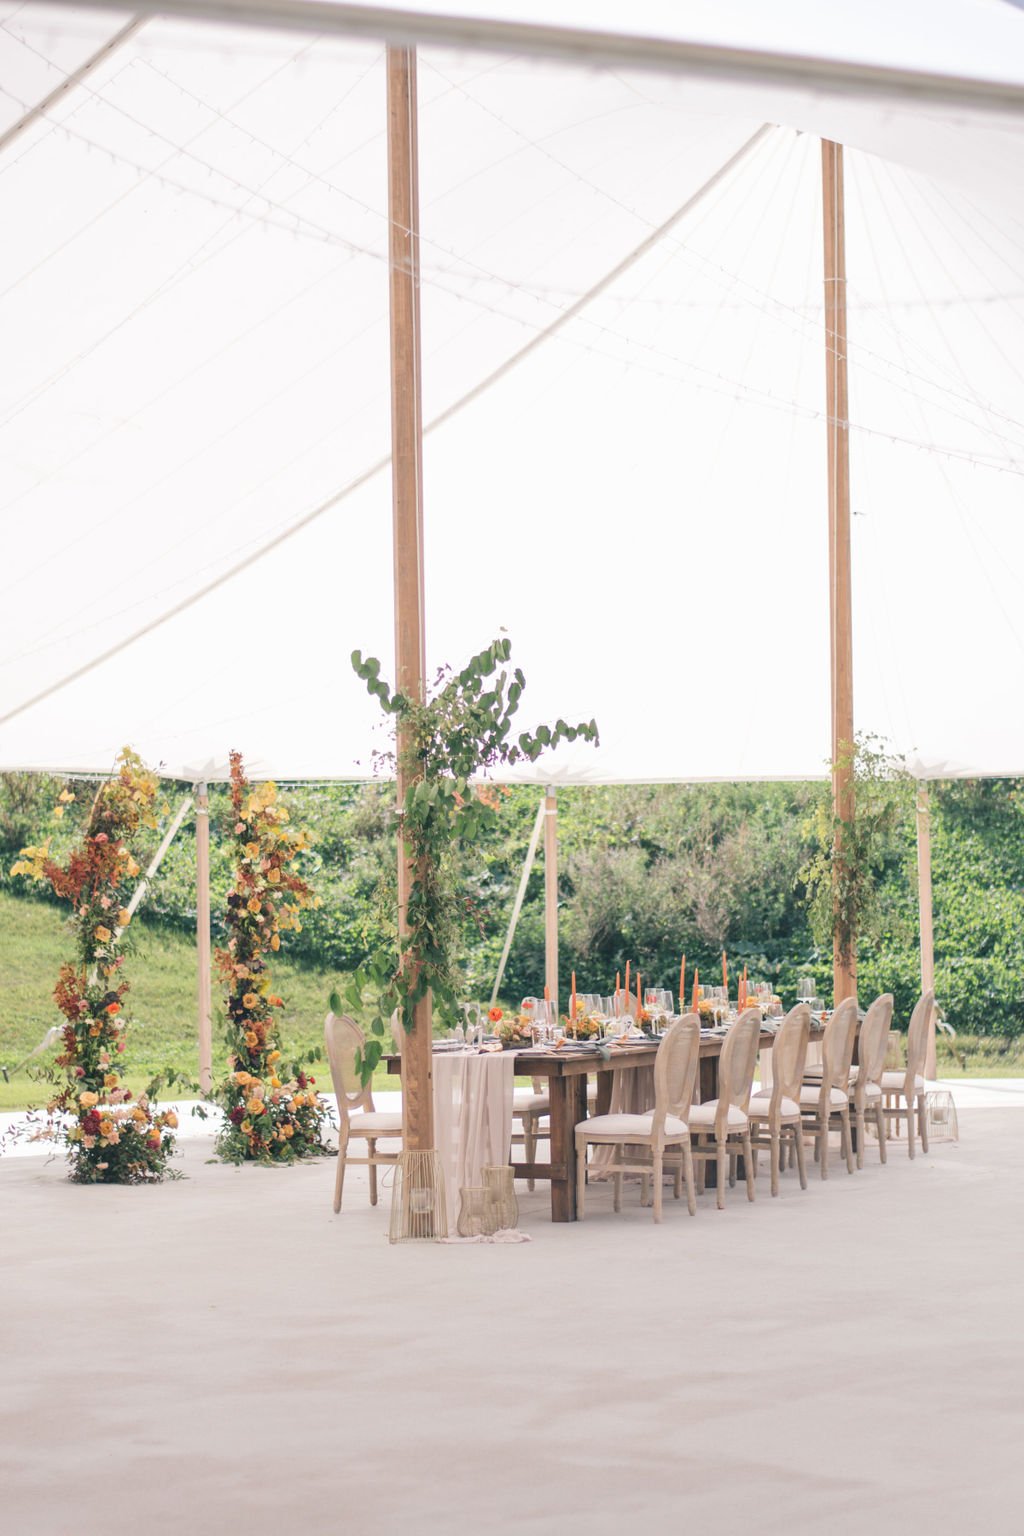 Sailcloth tent at Wakefield Estate for intimate wedding dinner.